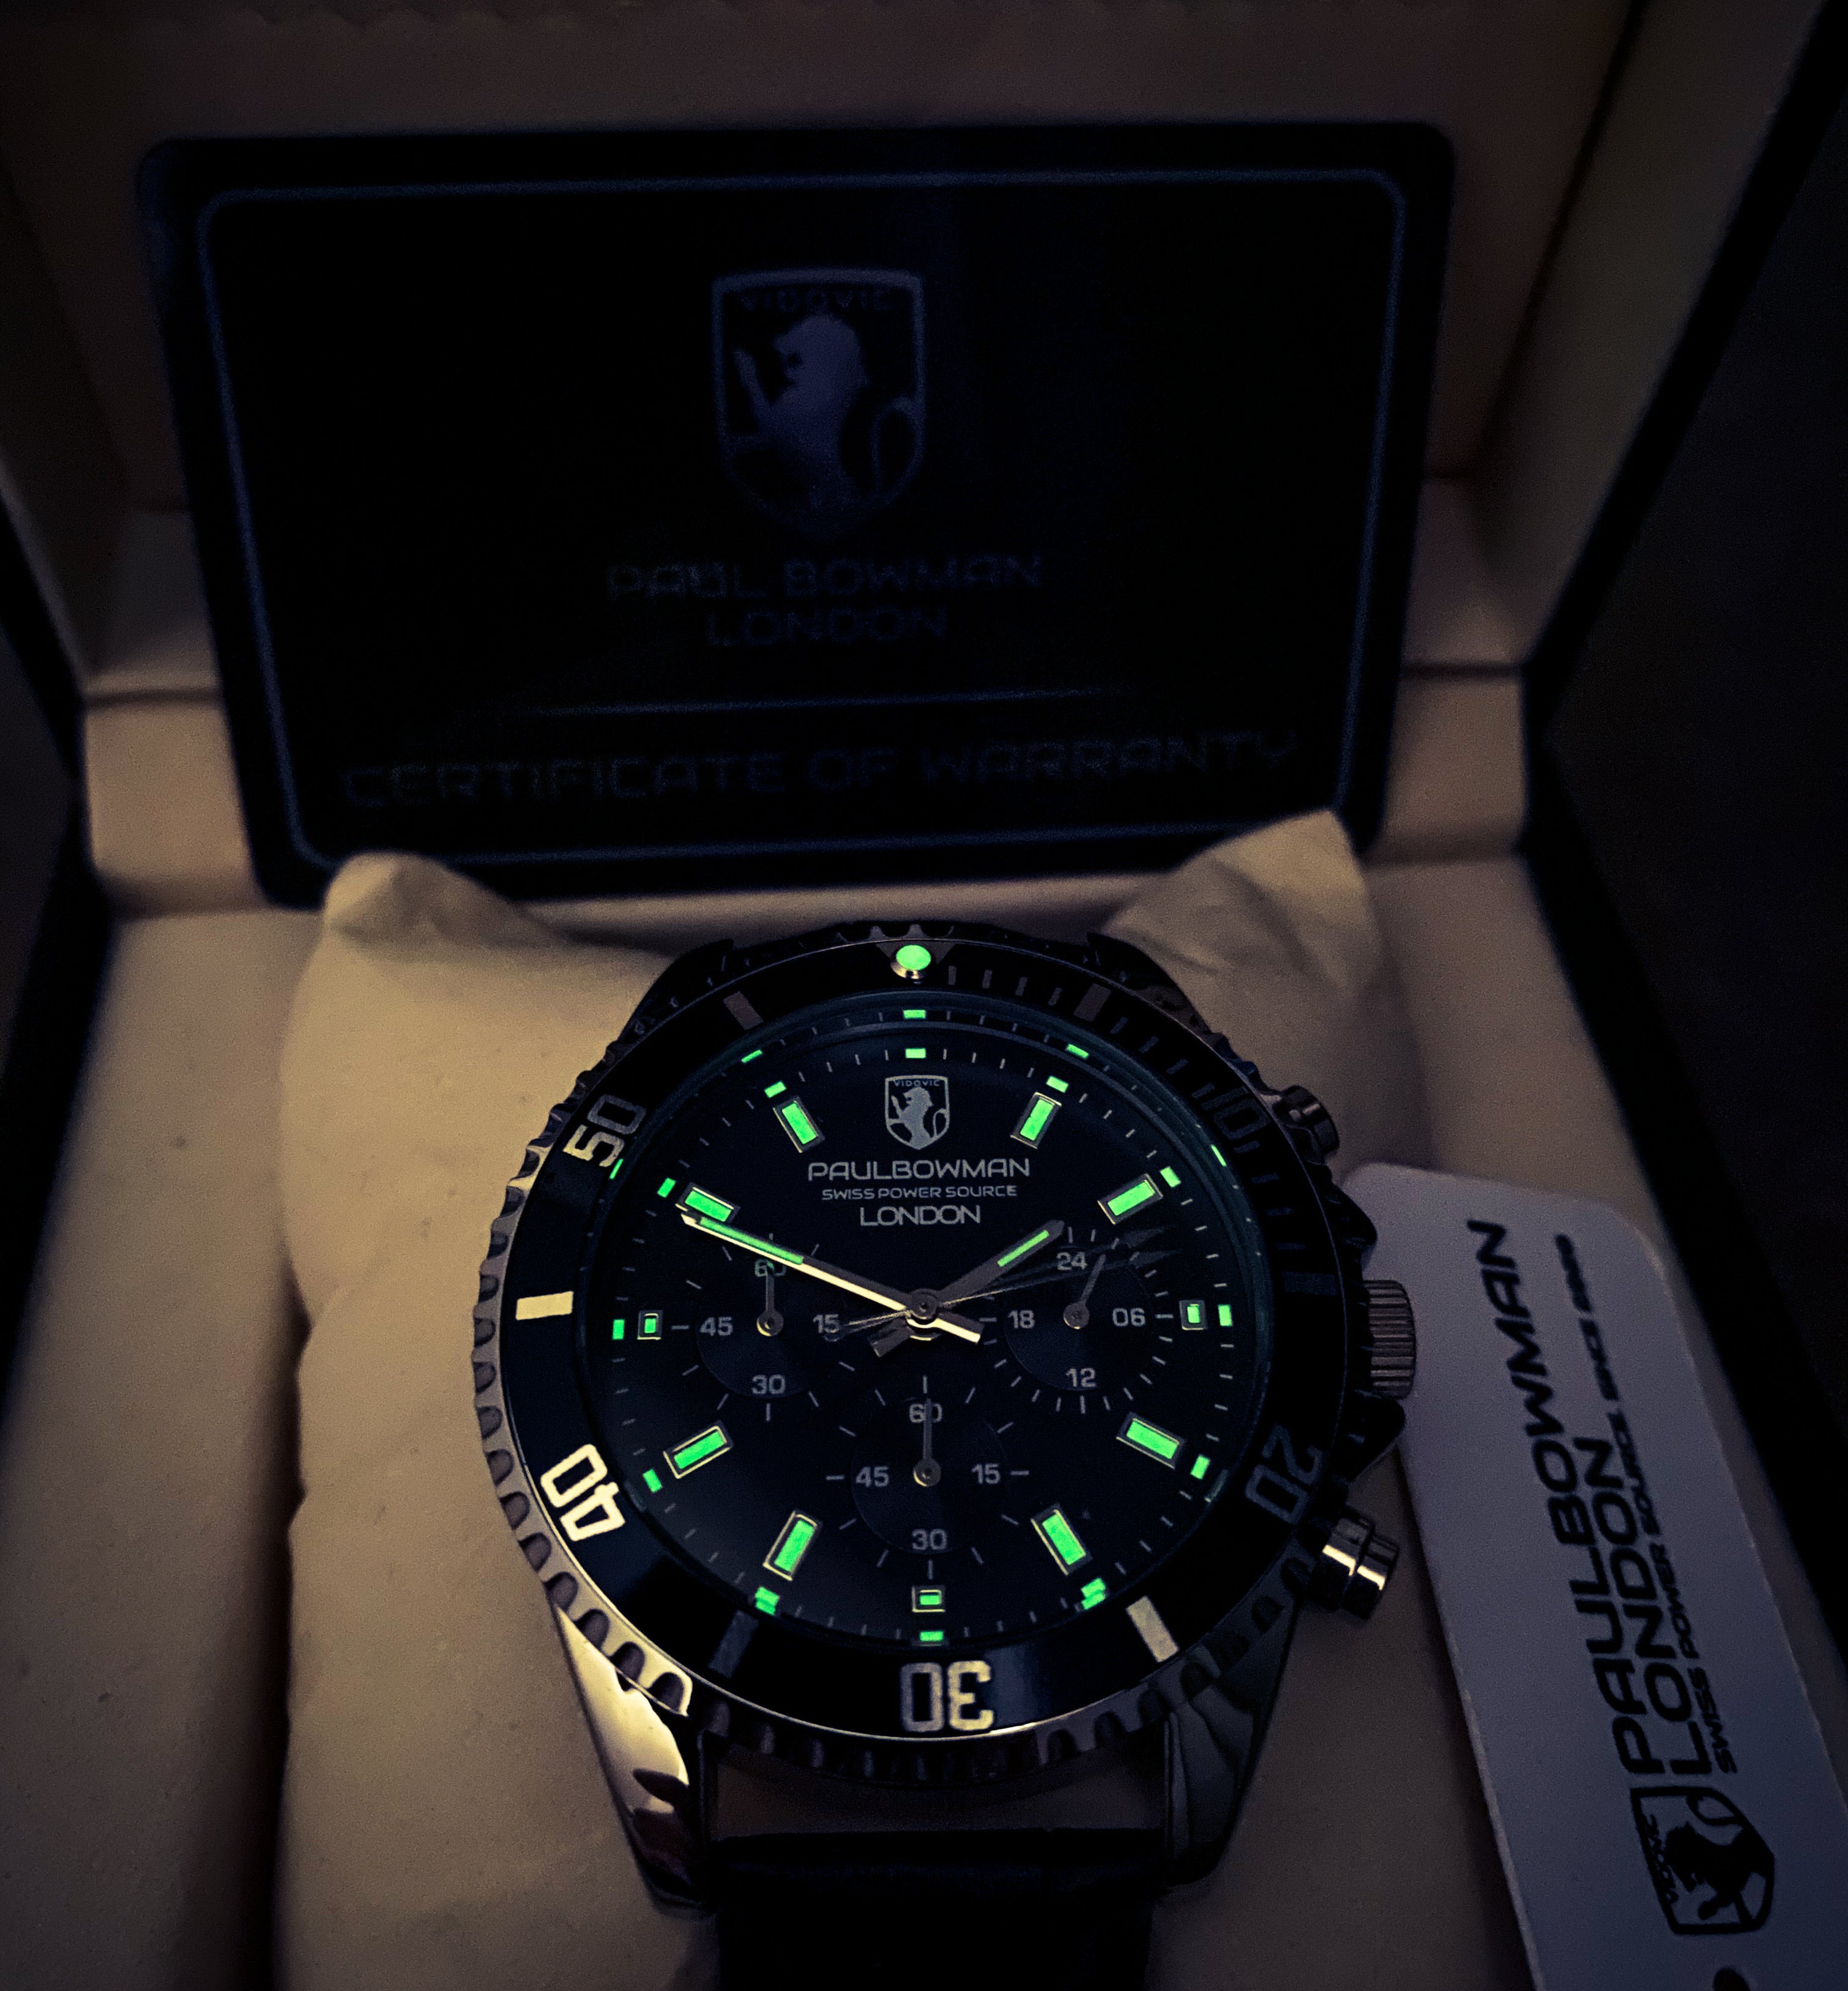 SOLD OUT - Paul Bowman London Dark Orion - Limited Edition Chronograph Watch - SOLD OUT